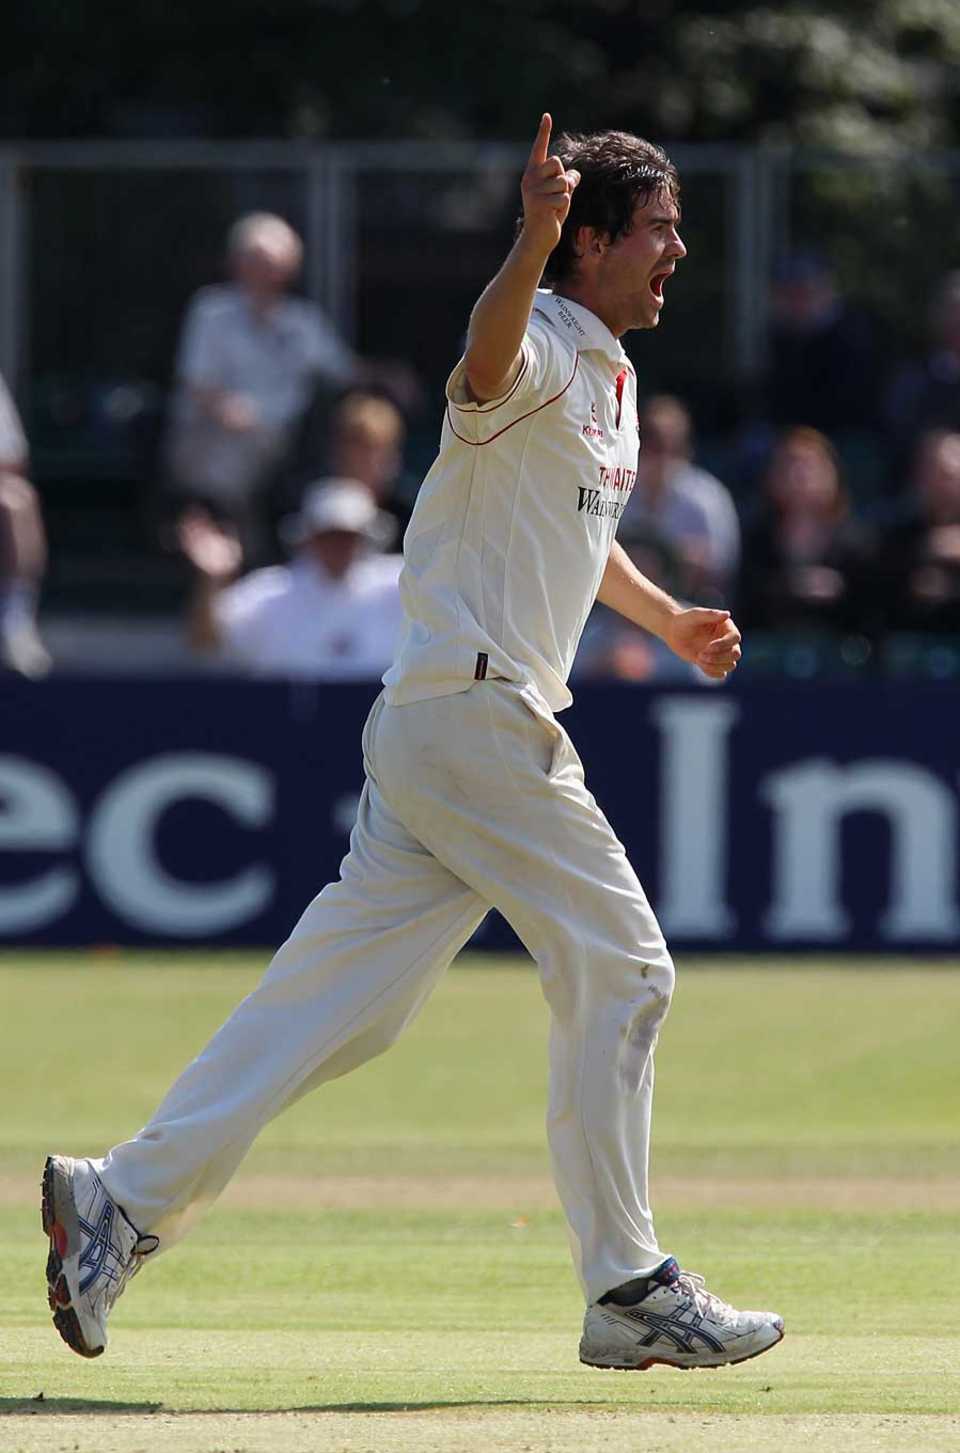 Kyle Hogg bagged 4 for 53 at Aigburth, Lancashire v Hampshire, County Championship, Division One, Liverpool, August 31, 2010